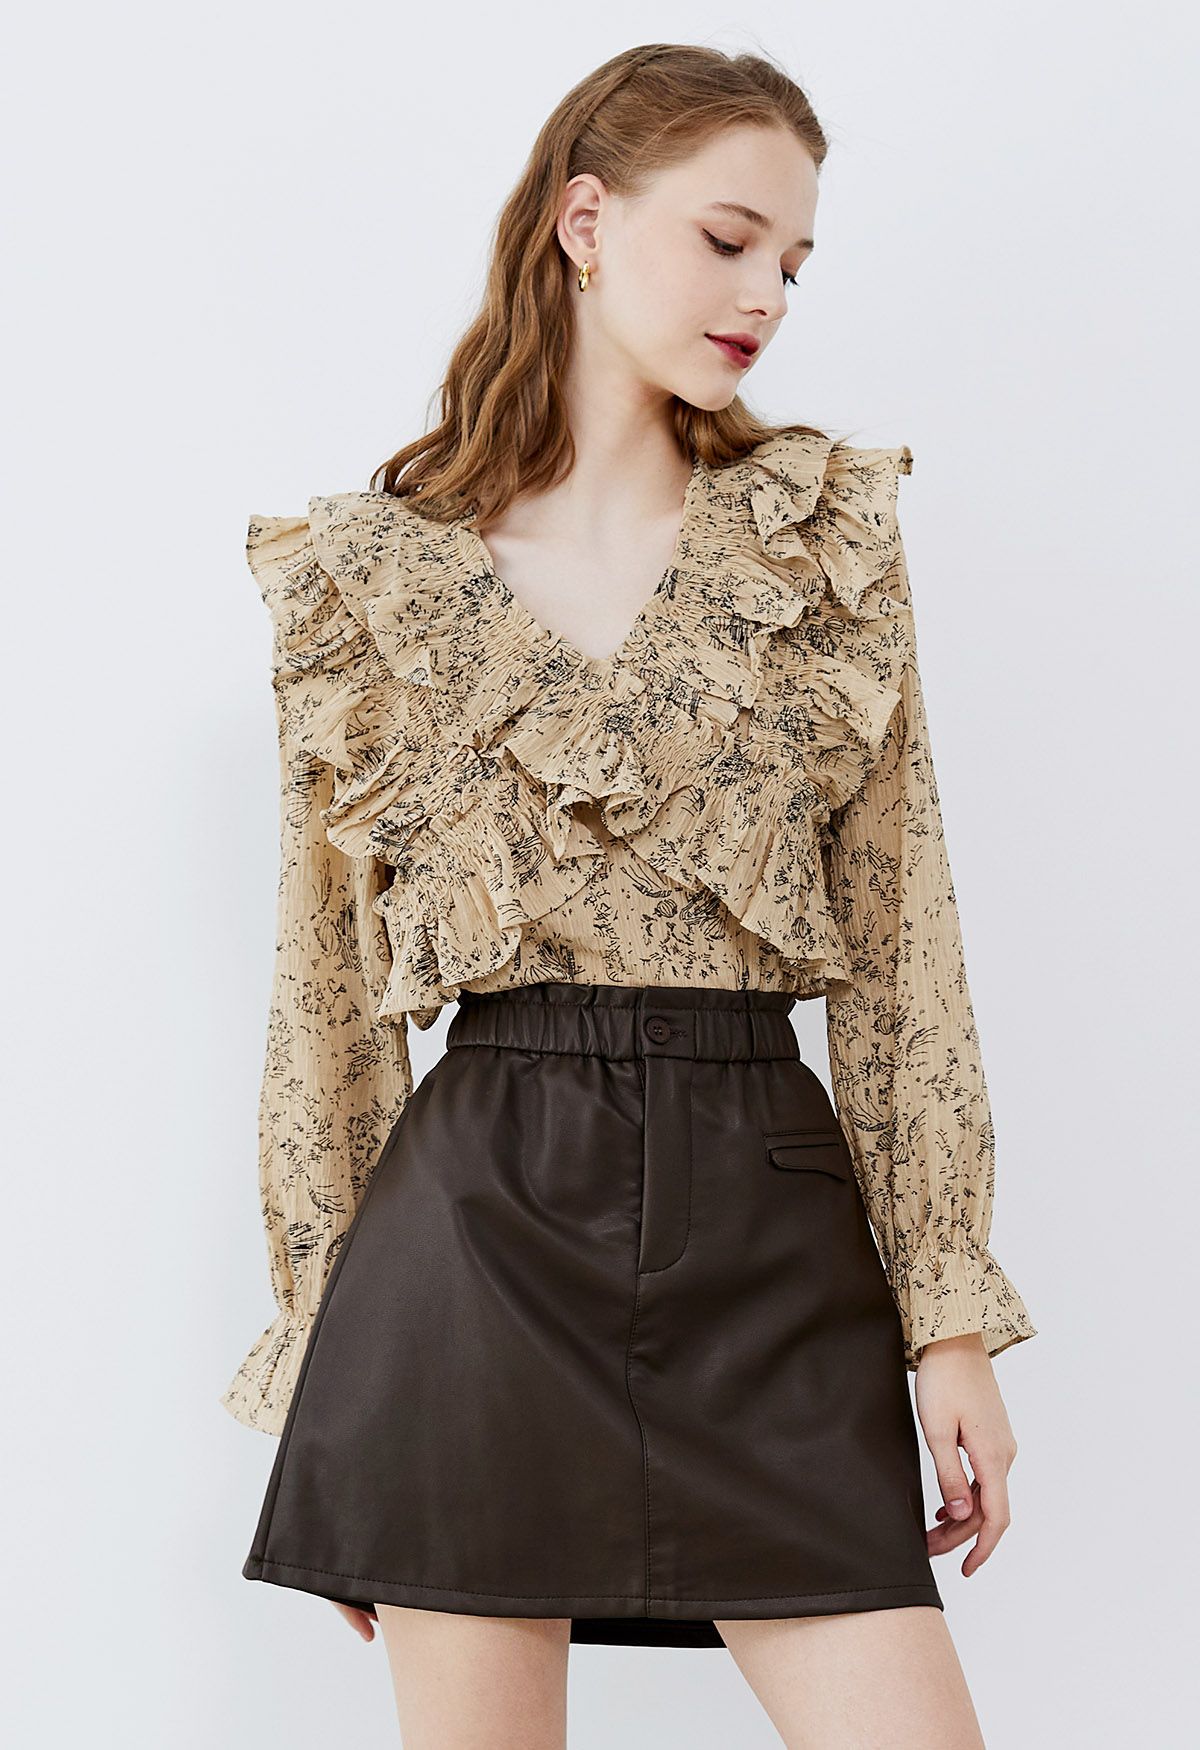 Abstract Print Cross Tiered Ruffled Top in Light Tan